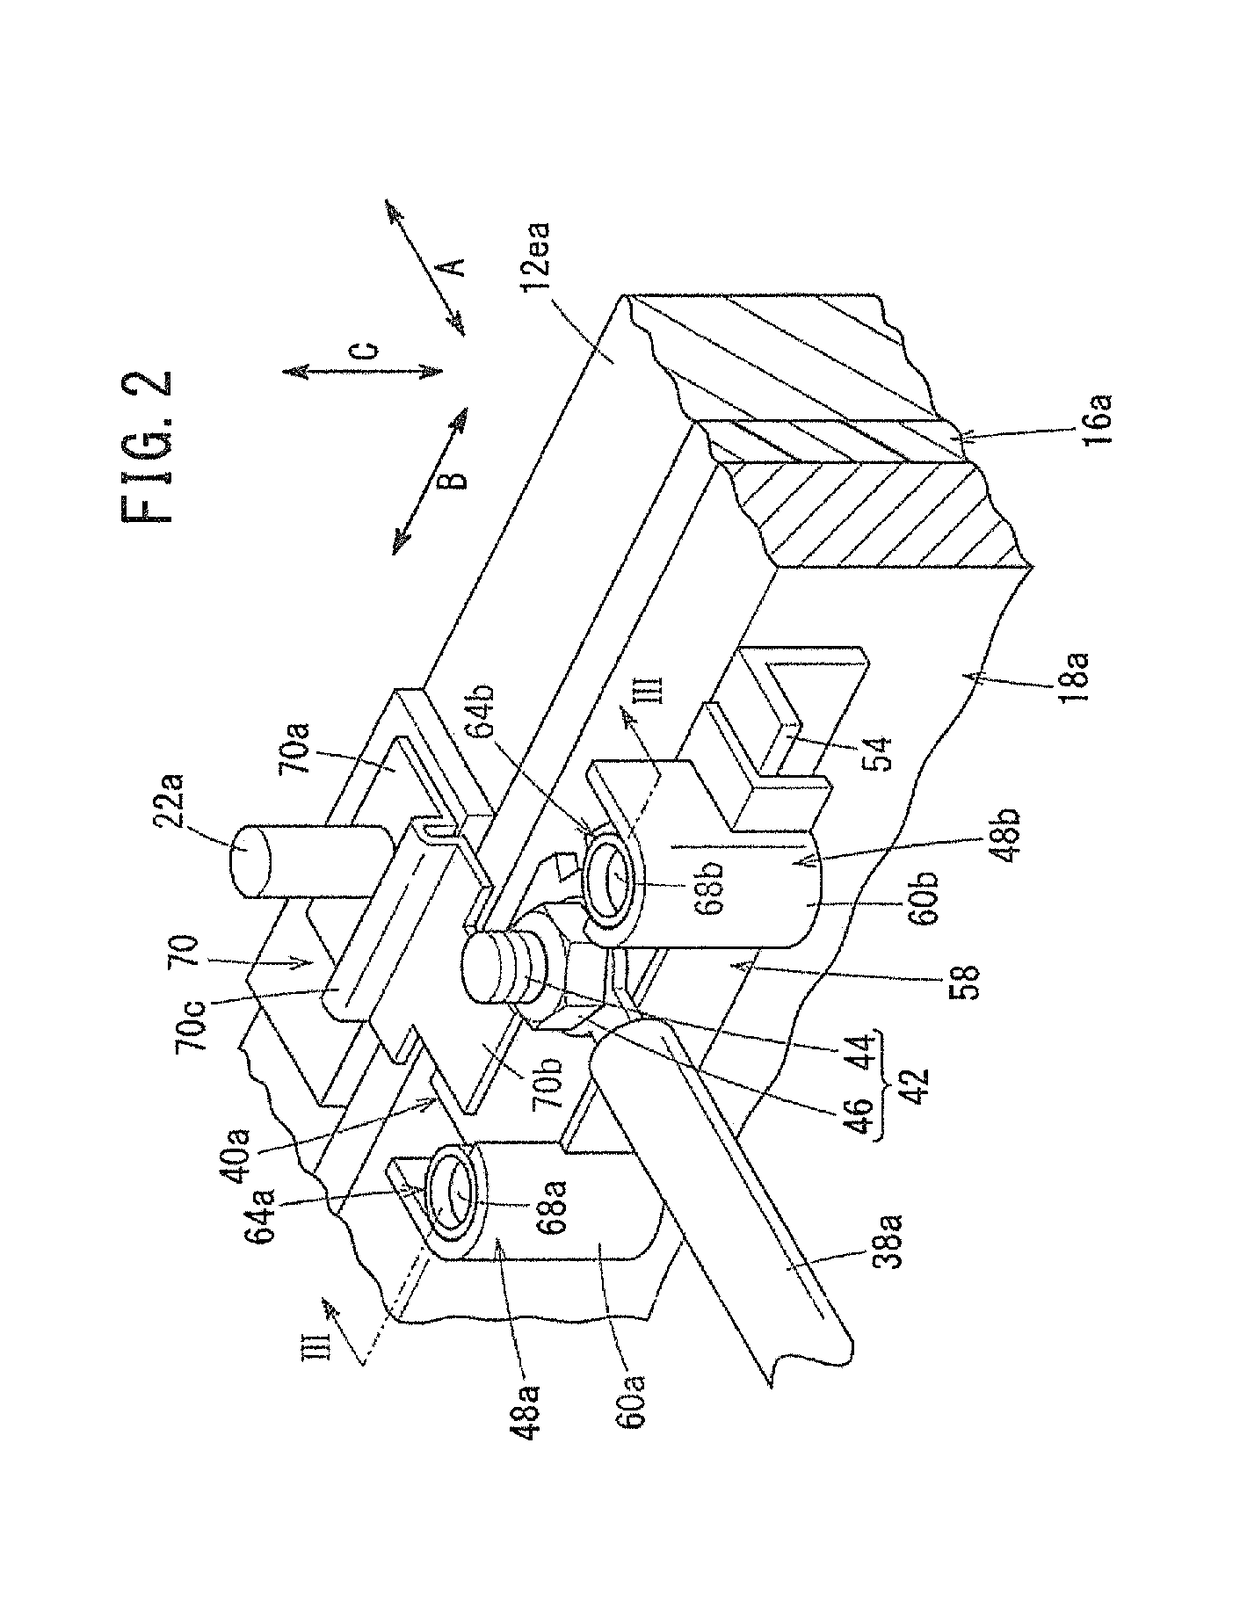 Energy storage module with reduced damage to electrode terminals